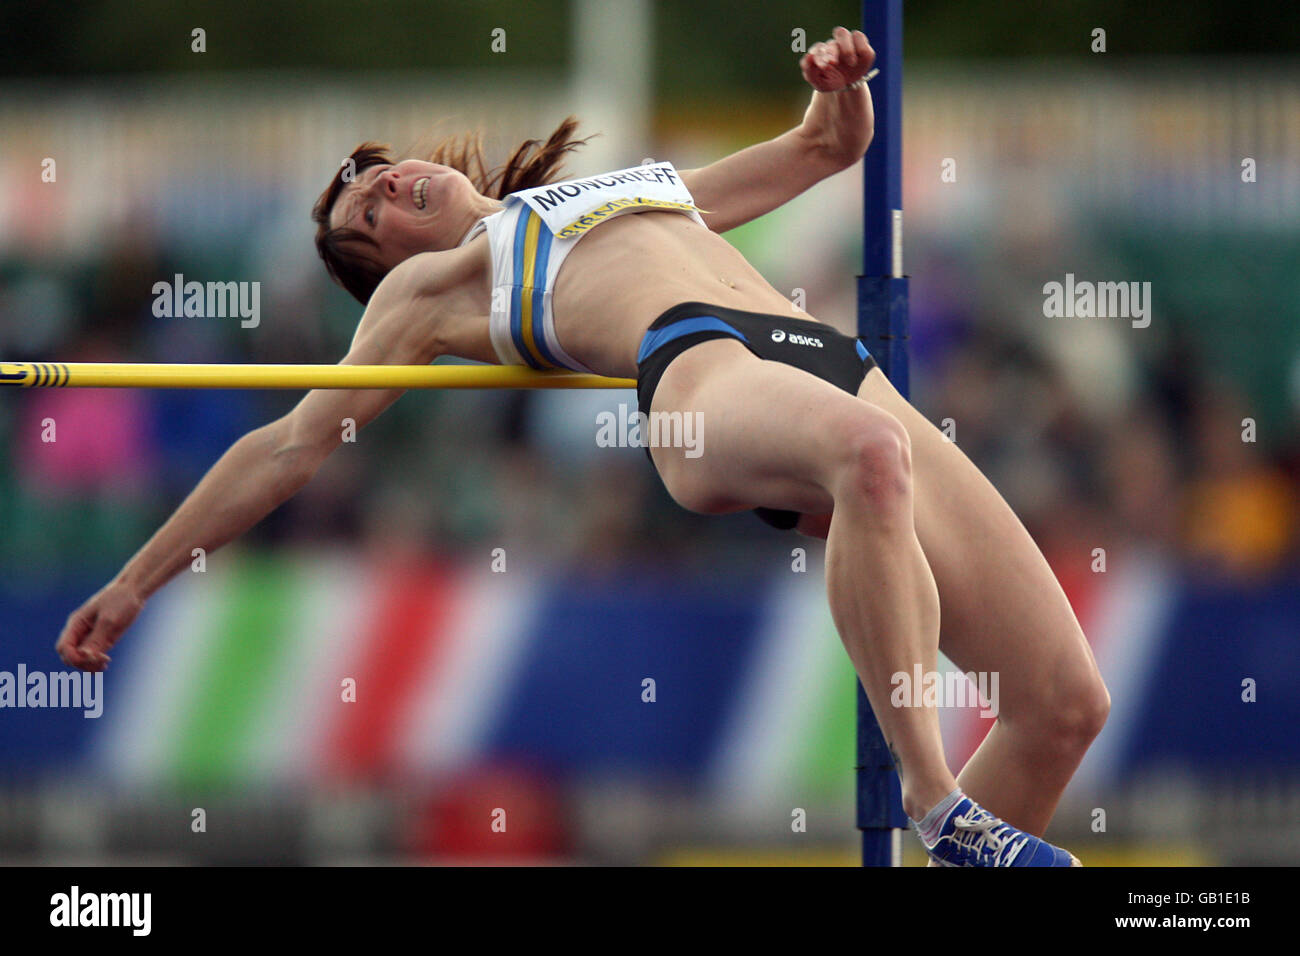 Trafford Athletic's Susan Moncrieff competes in the Women's High Jump Final during the Aviva National Championships, Alexander Stadium, Birmingham Stock Photo